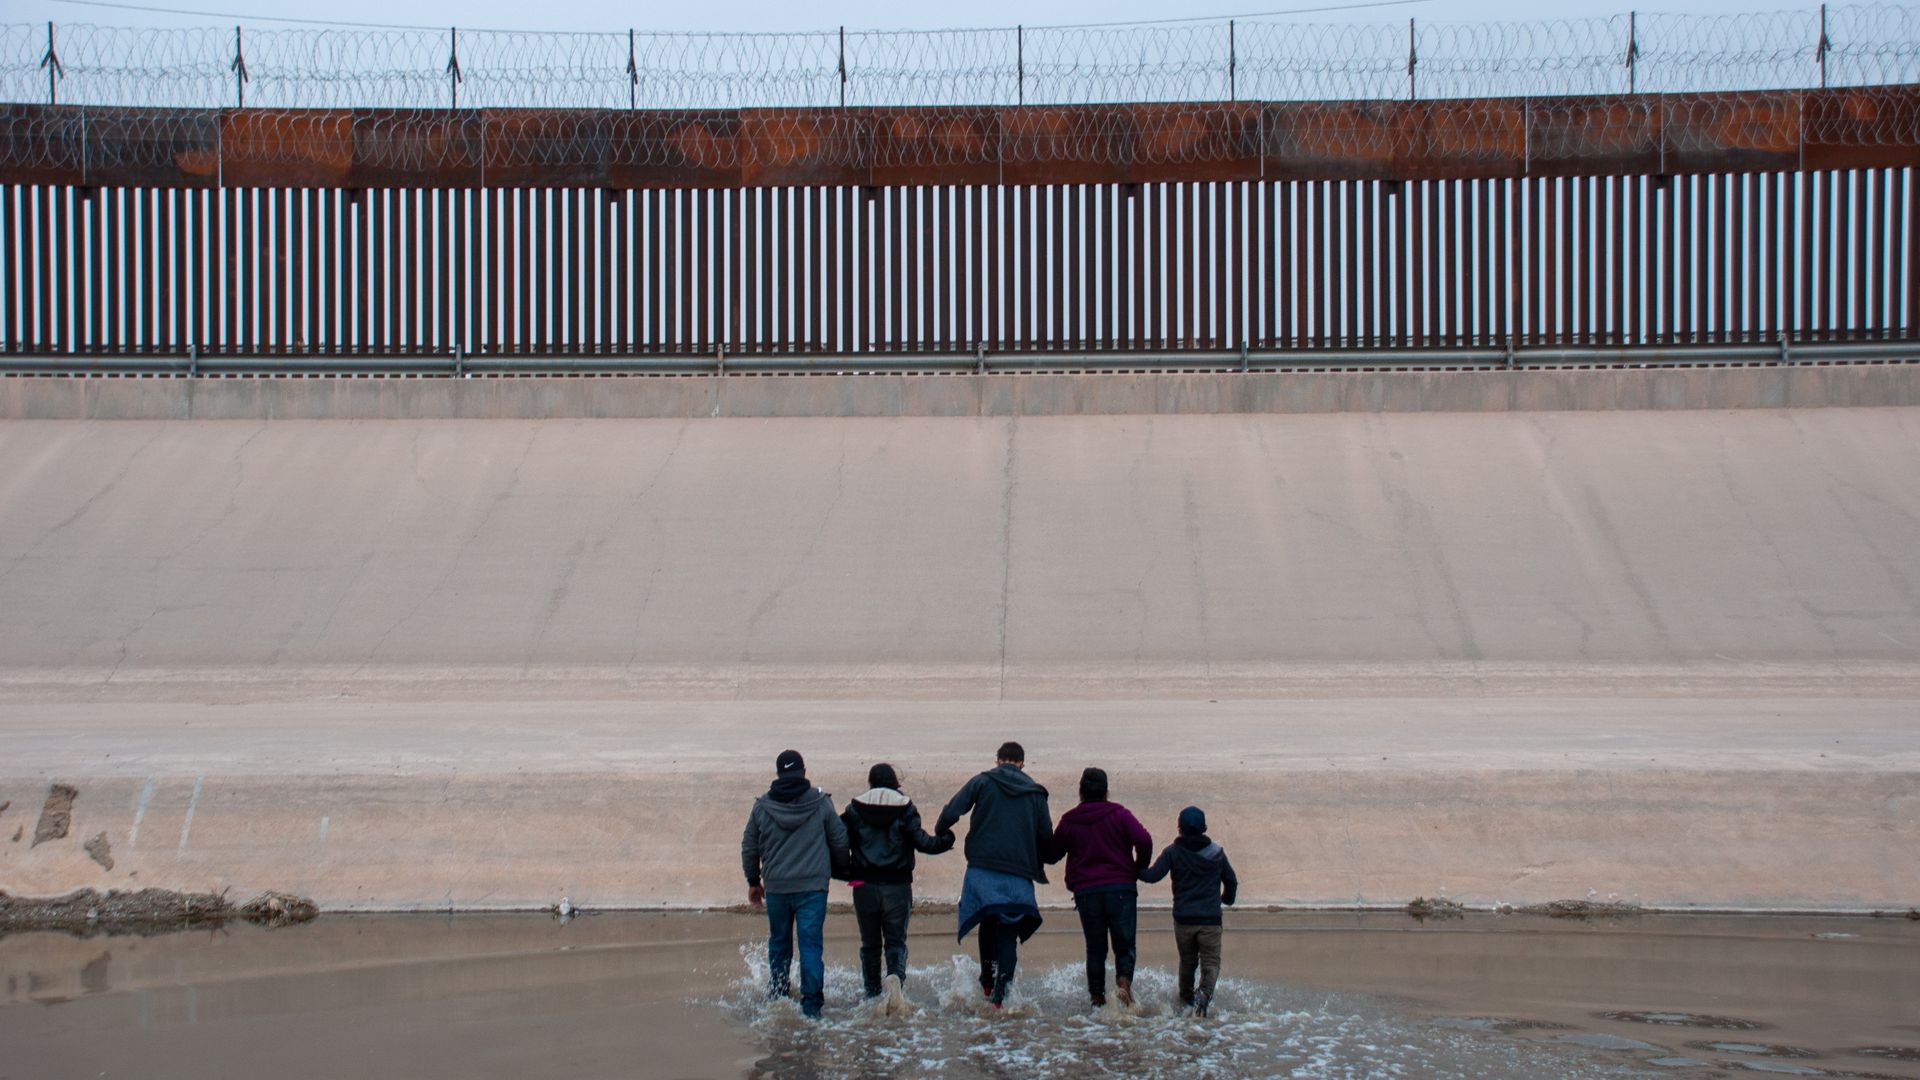 A group of migrants is seen crossing a river at the border between the United States and Mexico.